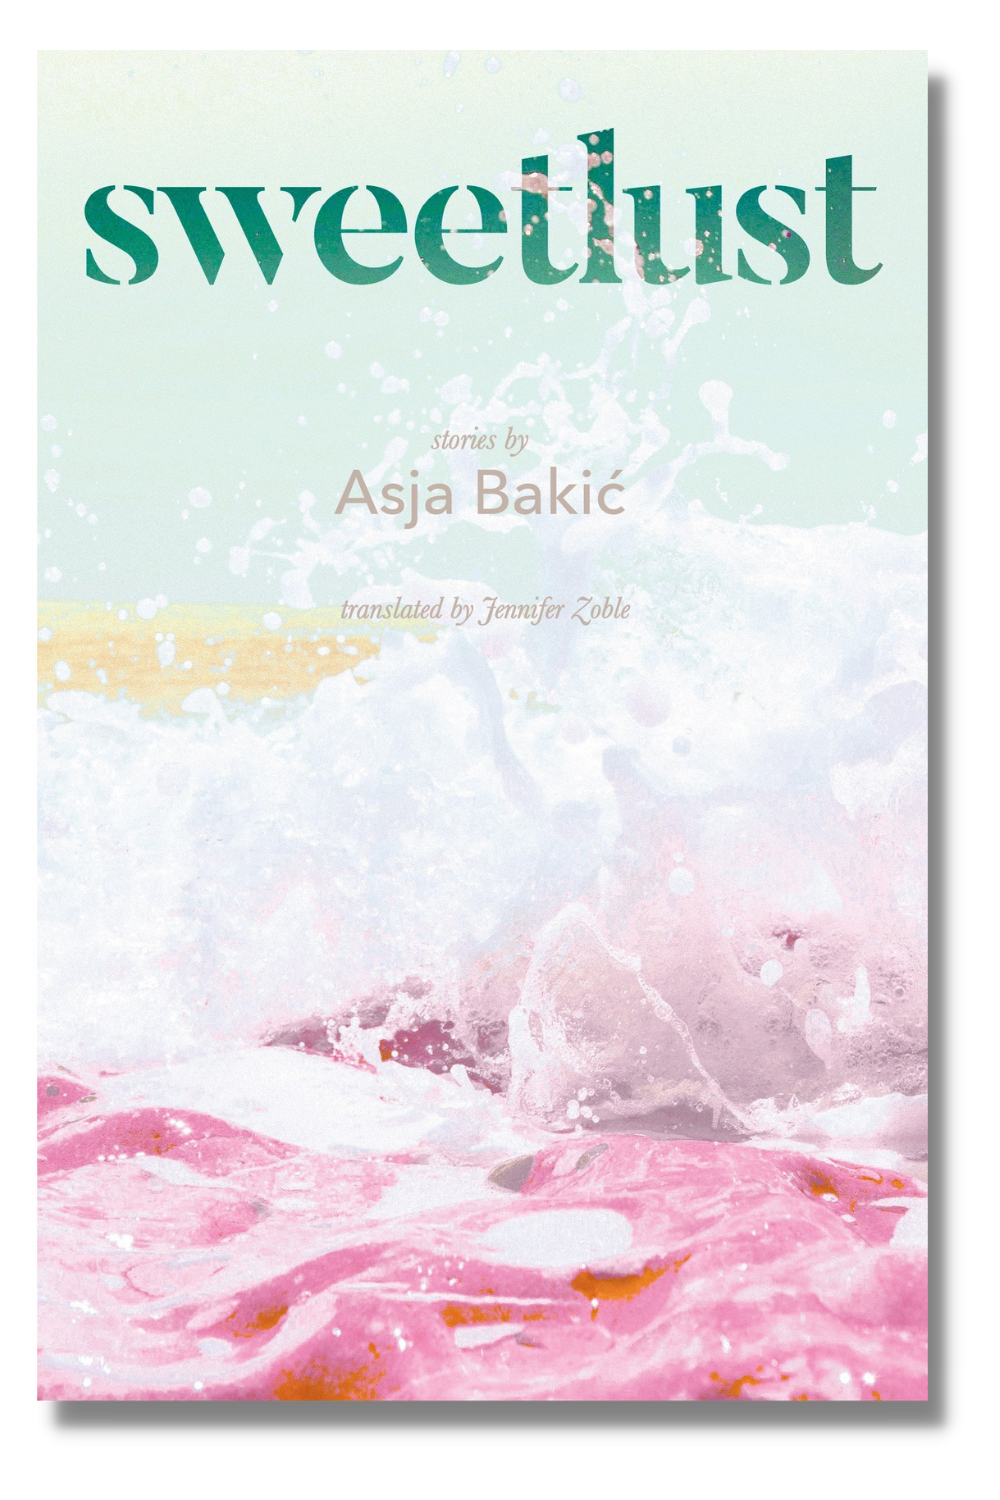 The cover of "Sweetlust"